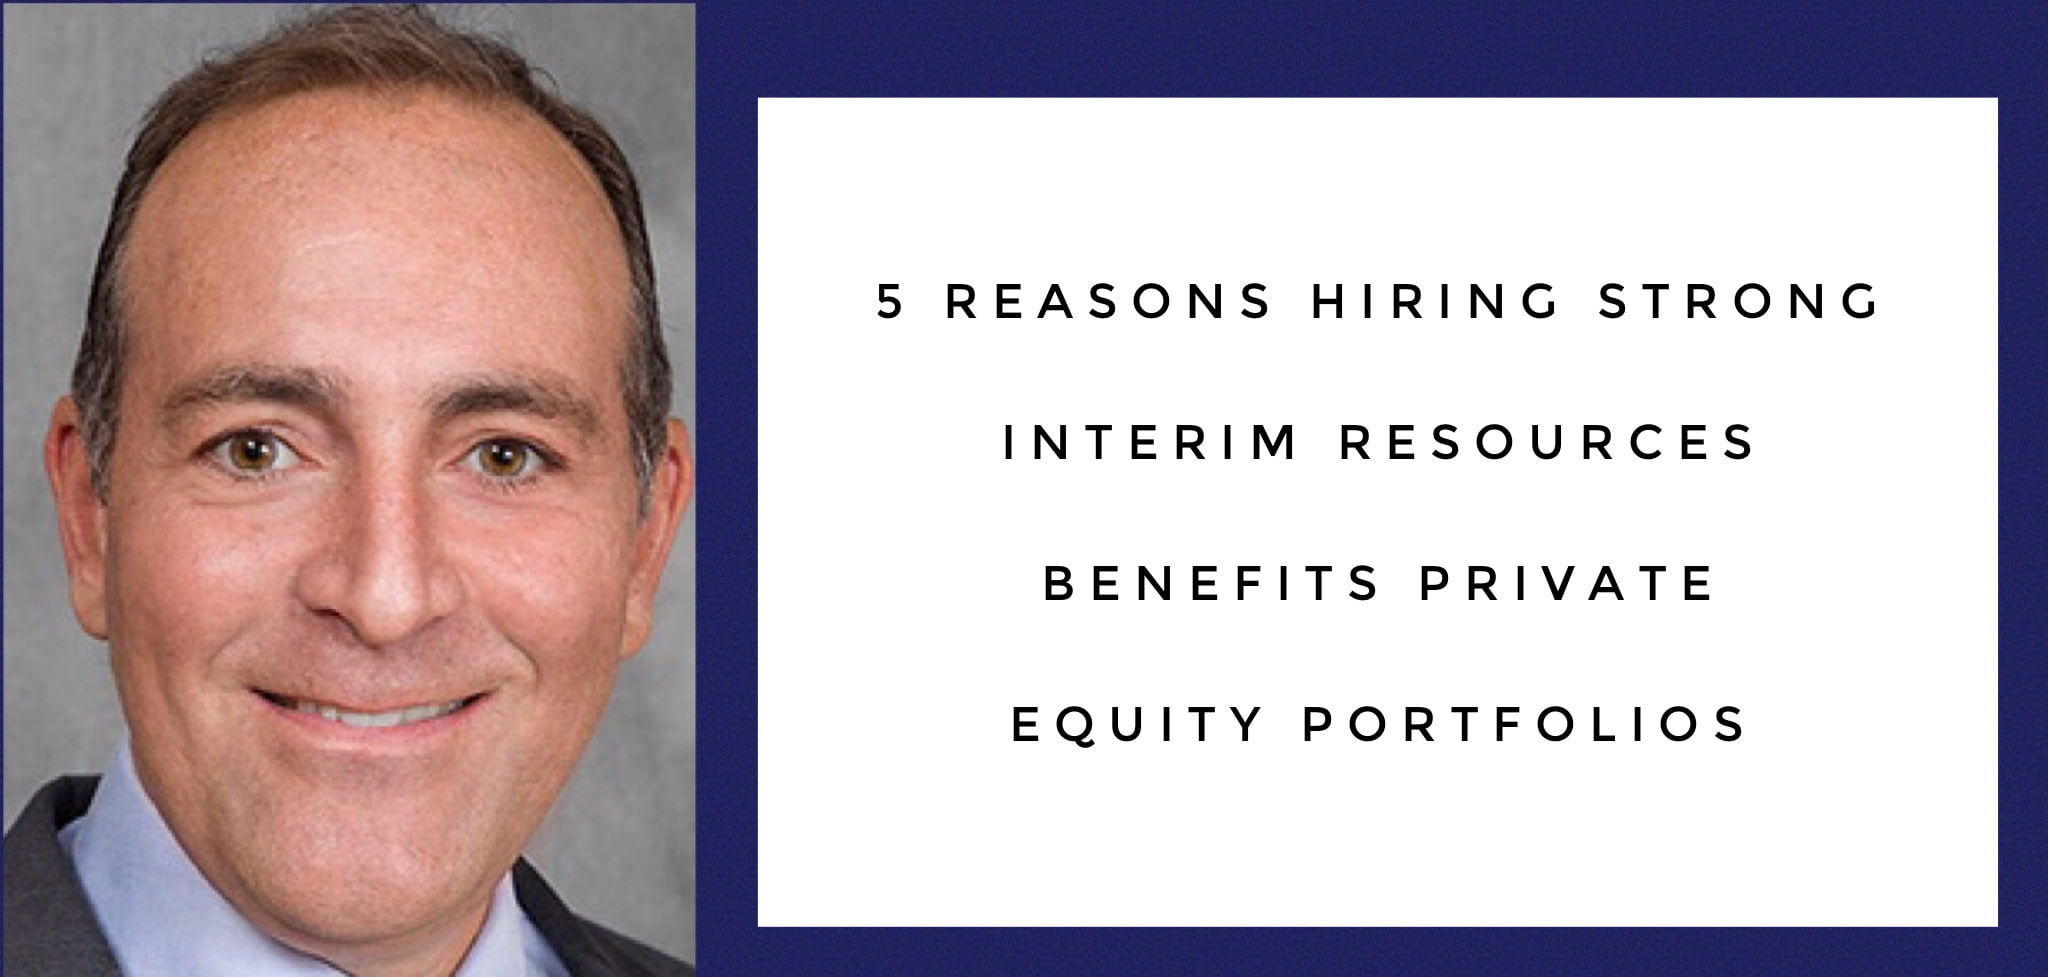 5 Reasons Hiring Strong Interim Resources Benefits Private Equity Portfolios